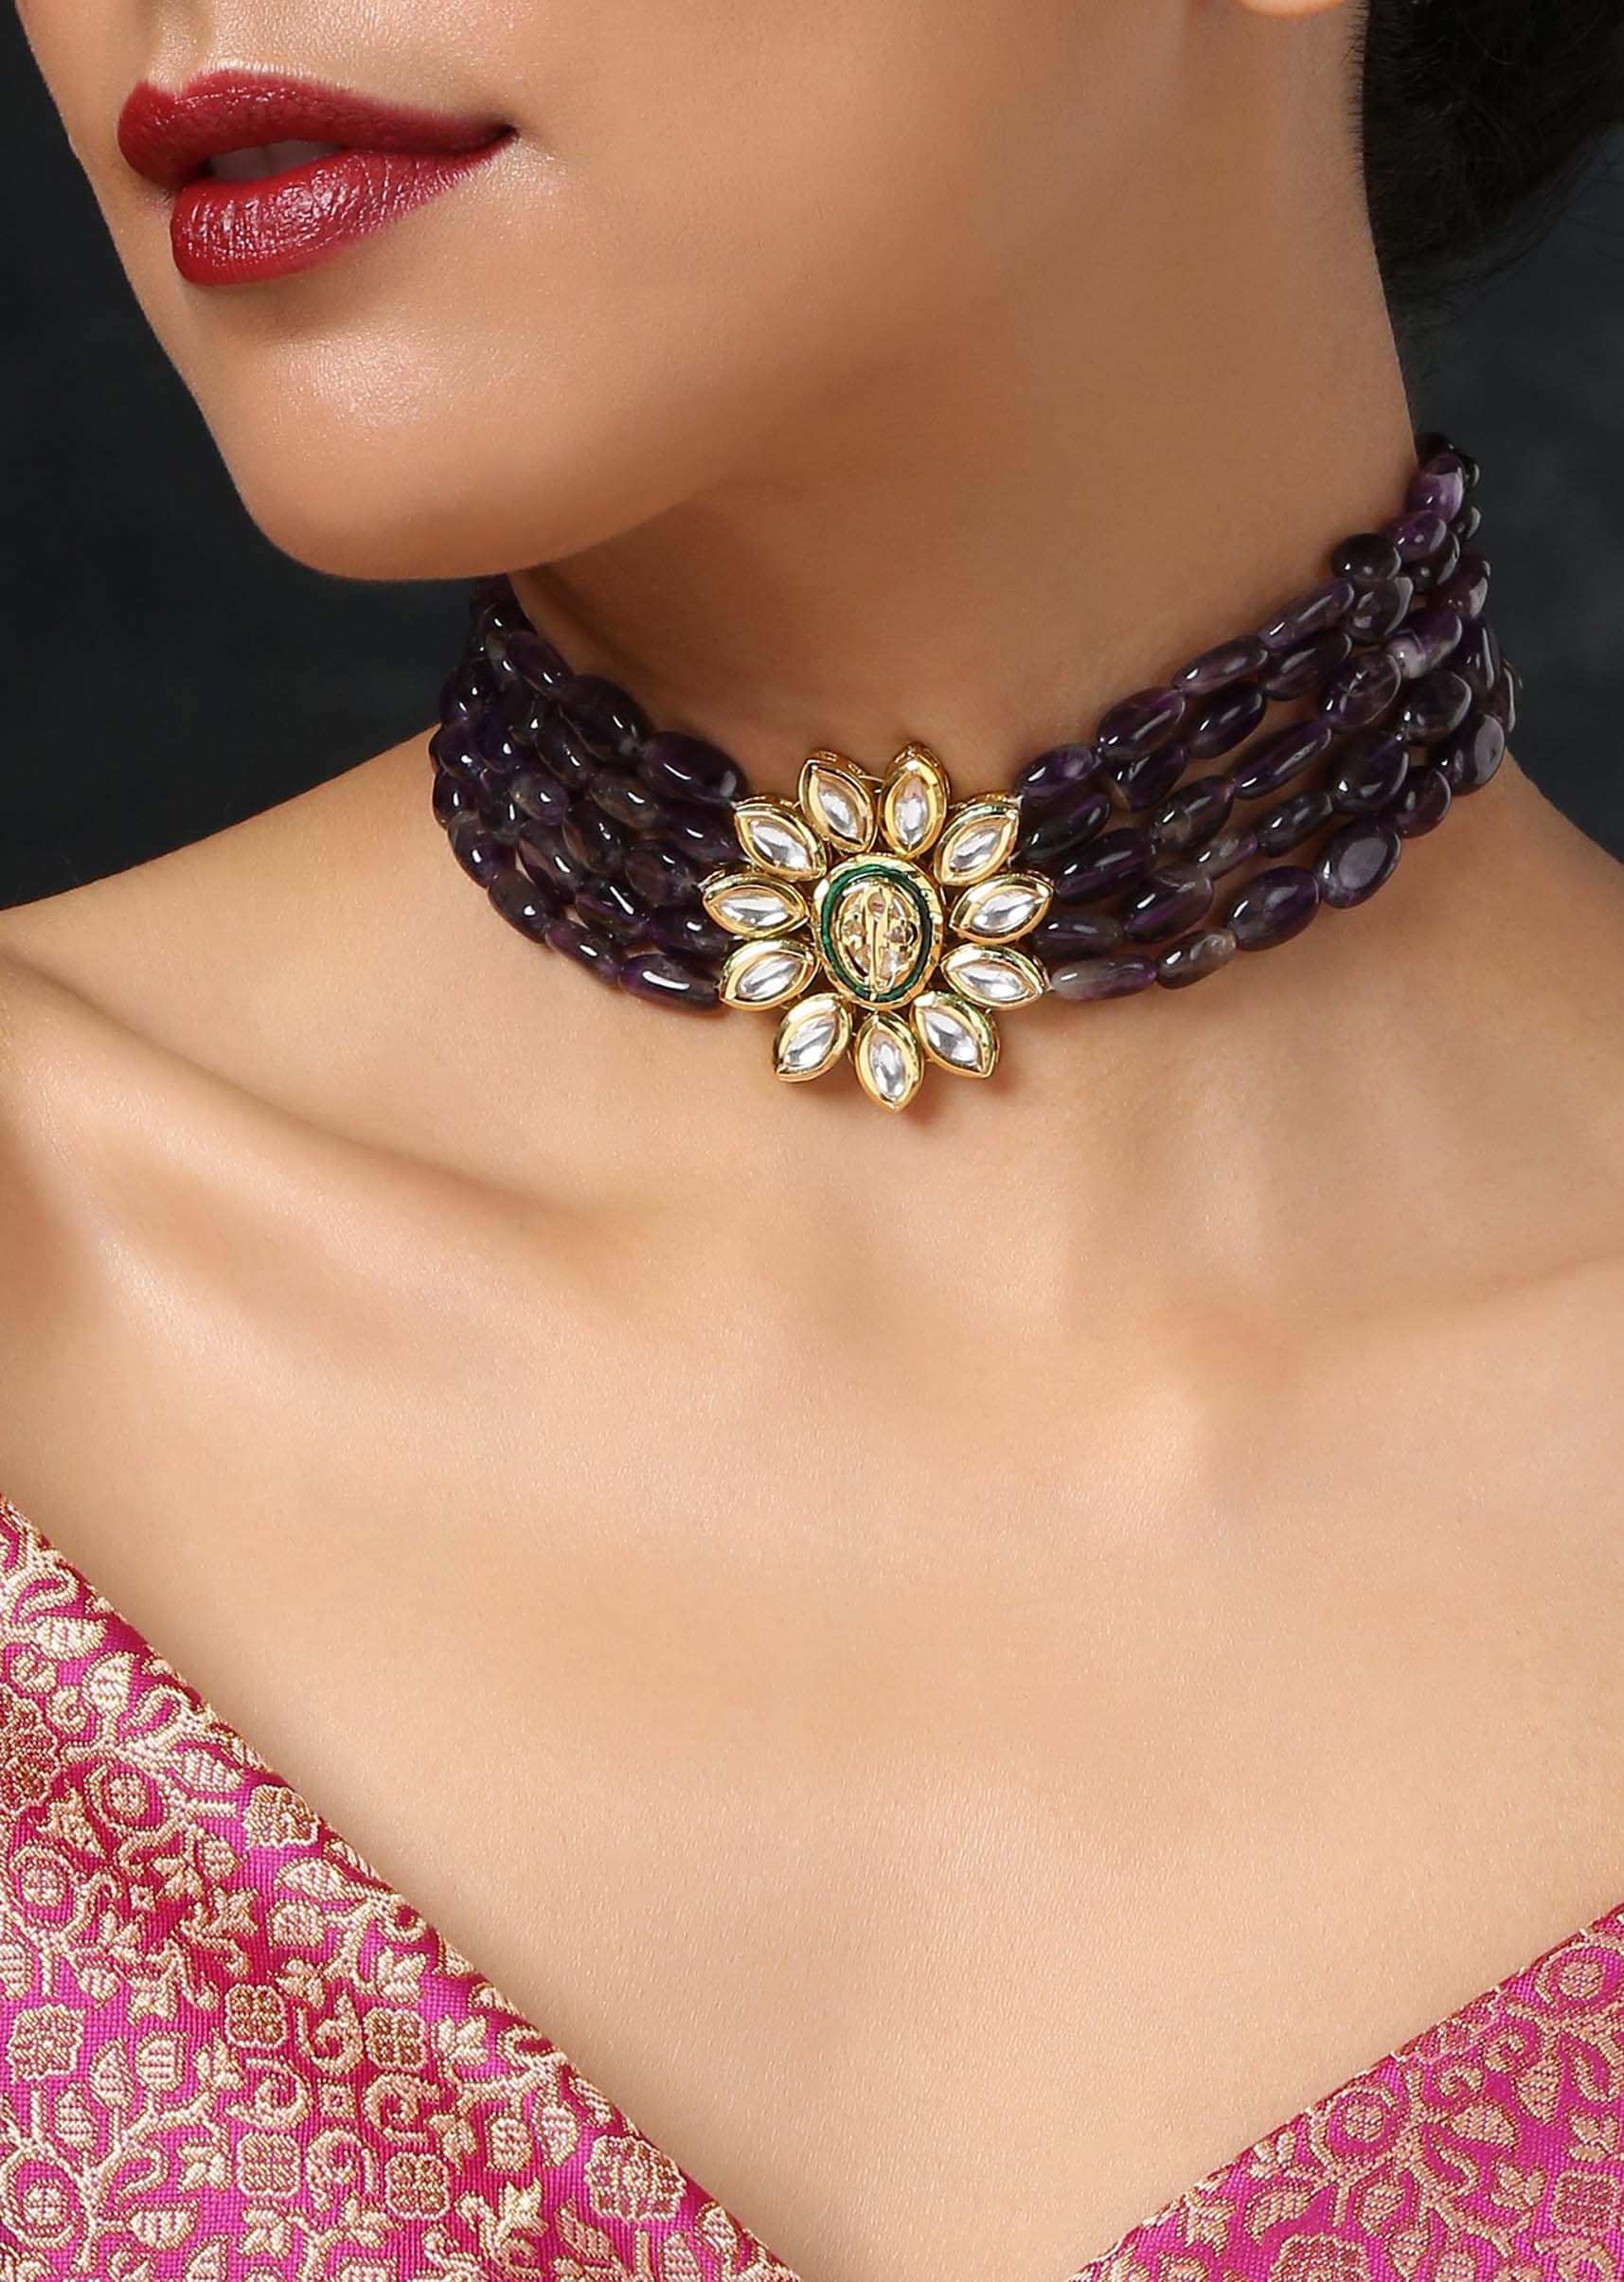 Purple Stone Necklace With A Kundan Floral Design In The Centre